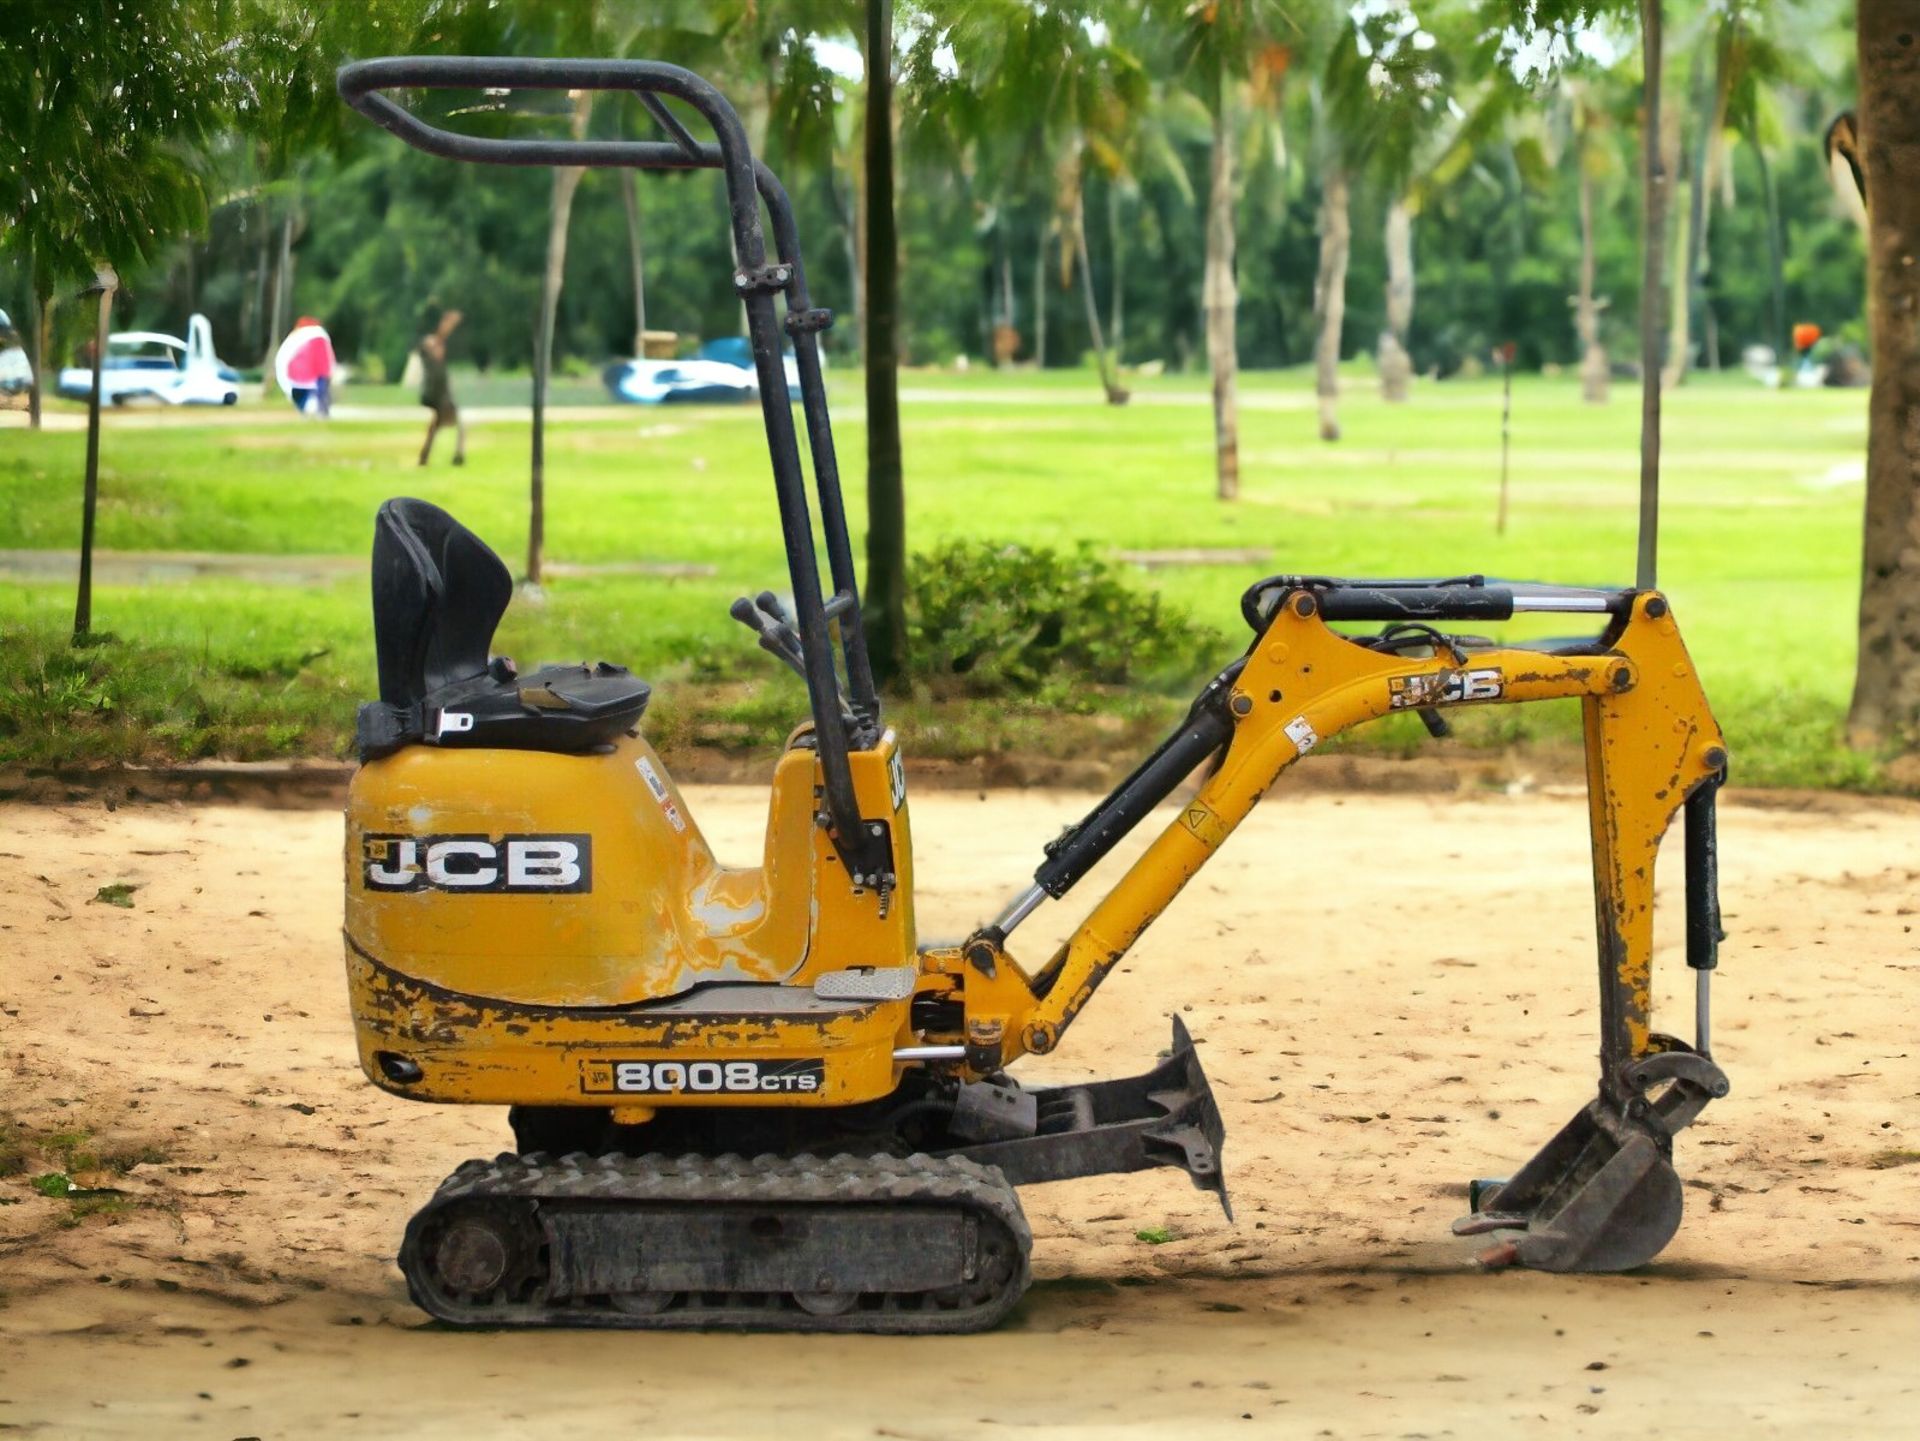 UNLOCK PRECISION AND POWER WITH THE JCB 8008 EXCAVATOR - Image 9 of 11